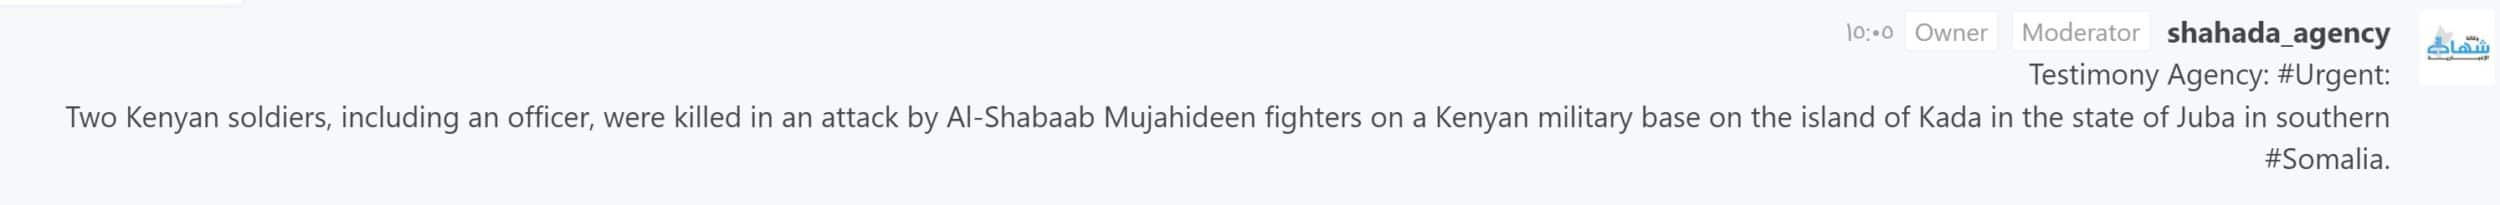 (Claim) al-Shabaab: Mujahideen Attacked a Kenyan Military Base, Killing Two Soldiers, Including an Officer, in Kada Island, Juba State, Southern Somalia - 23 March 2022